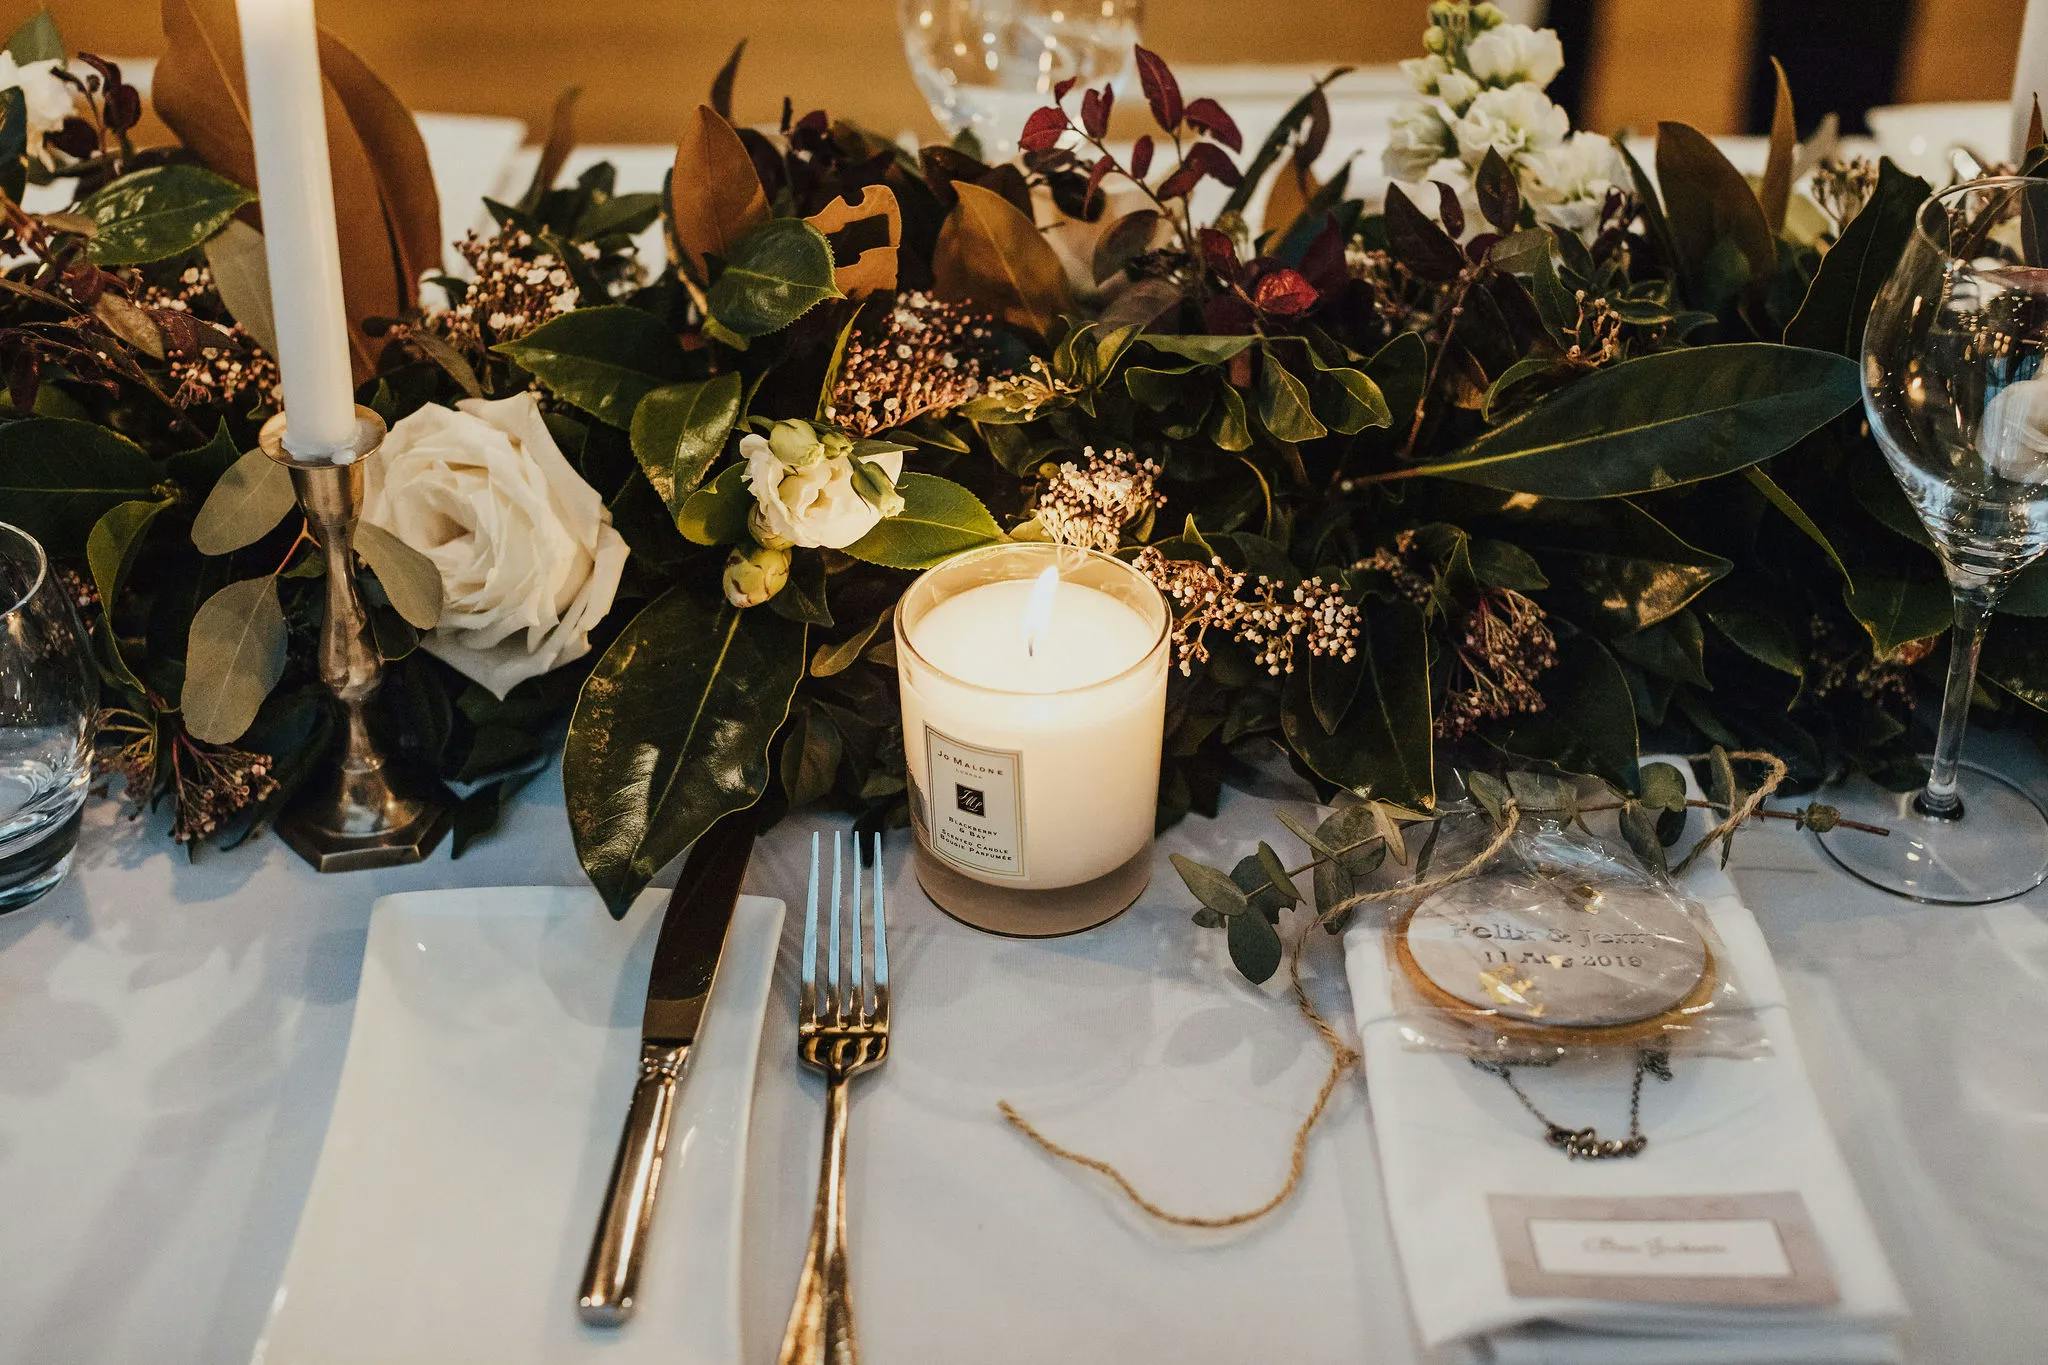 A beautifully decorated table set for a formal meal. There are elegant place settings with a knife, fork, and napkin, a lit candle, and lush green and white floral arrangements. Wine glasses and a name card are also present, adding a touch of sophistication.